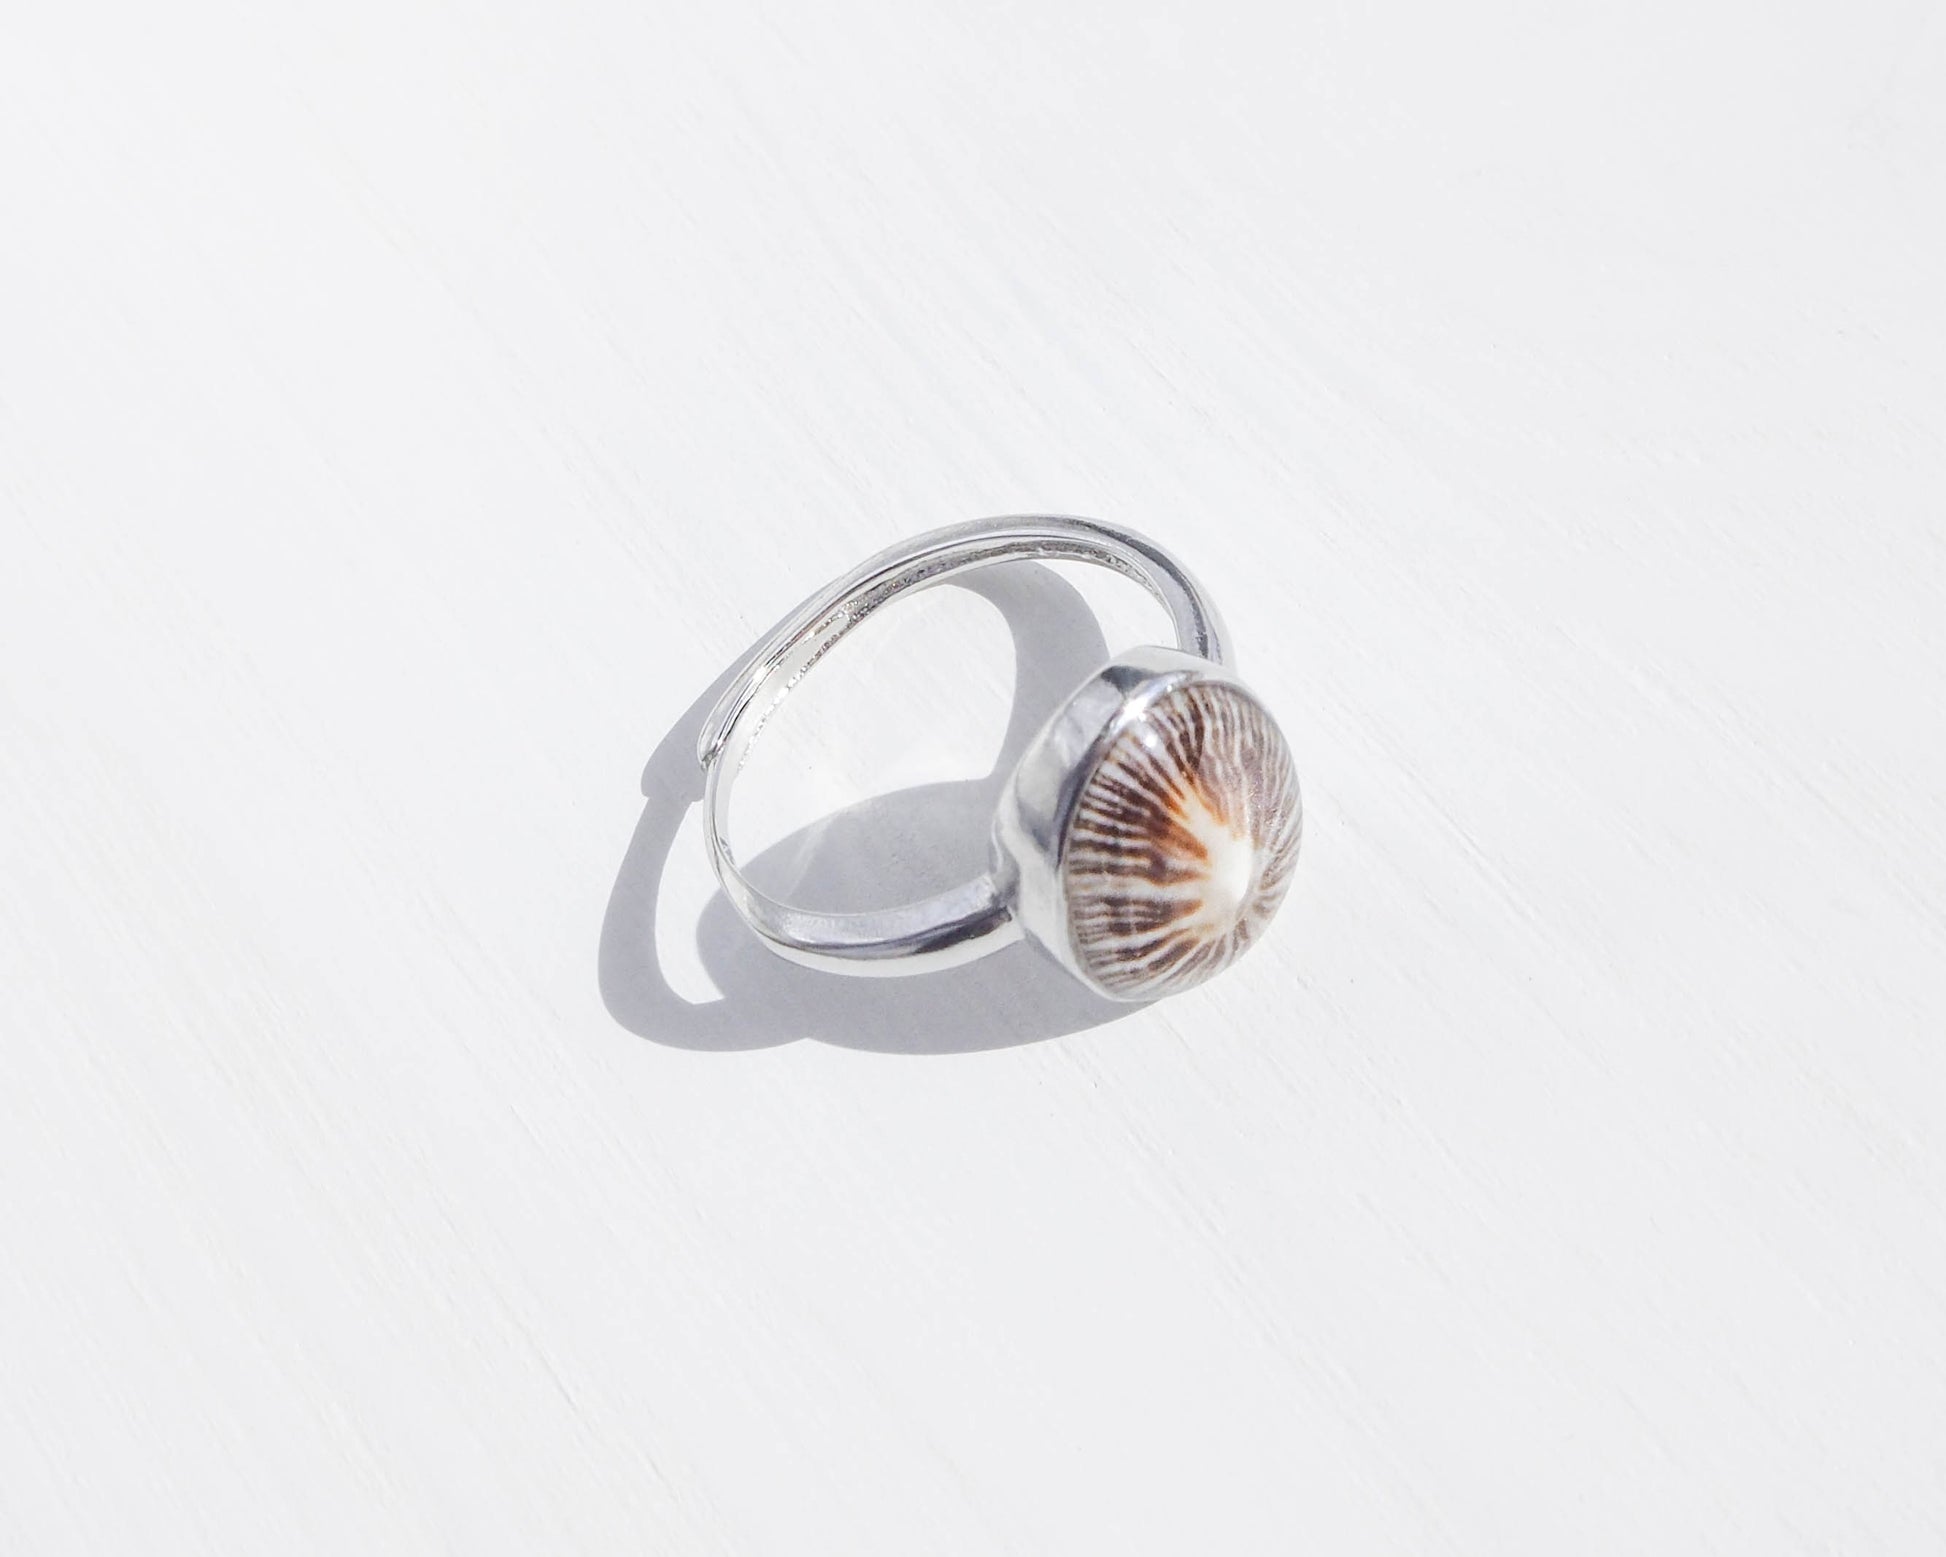 Beach Chic 925 Silver Ring with Limpet Shell Star - Oceanic Elegance and Coastal Glamour, Jewelry from Portugal, Seashell jewelry, Silver shell ring